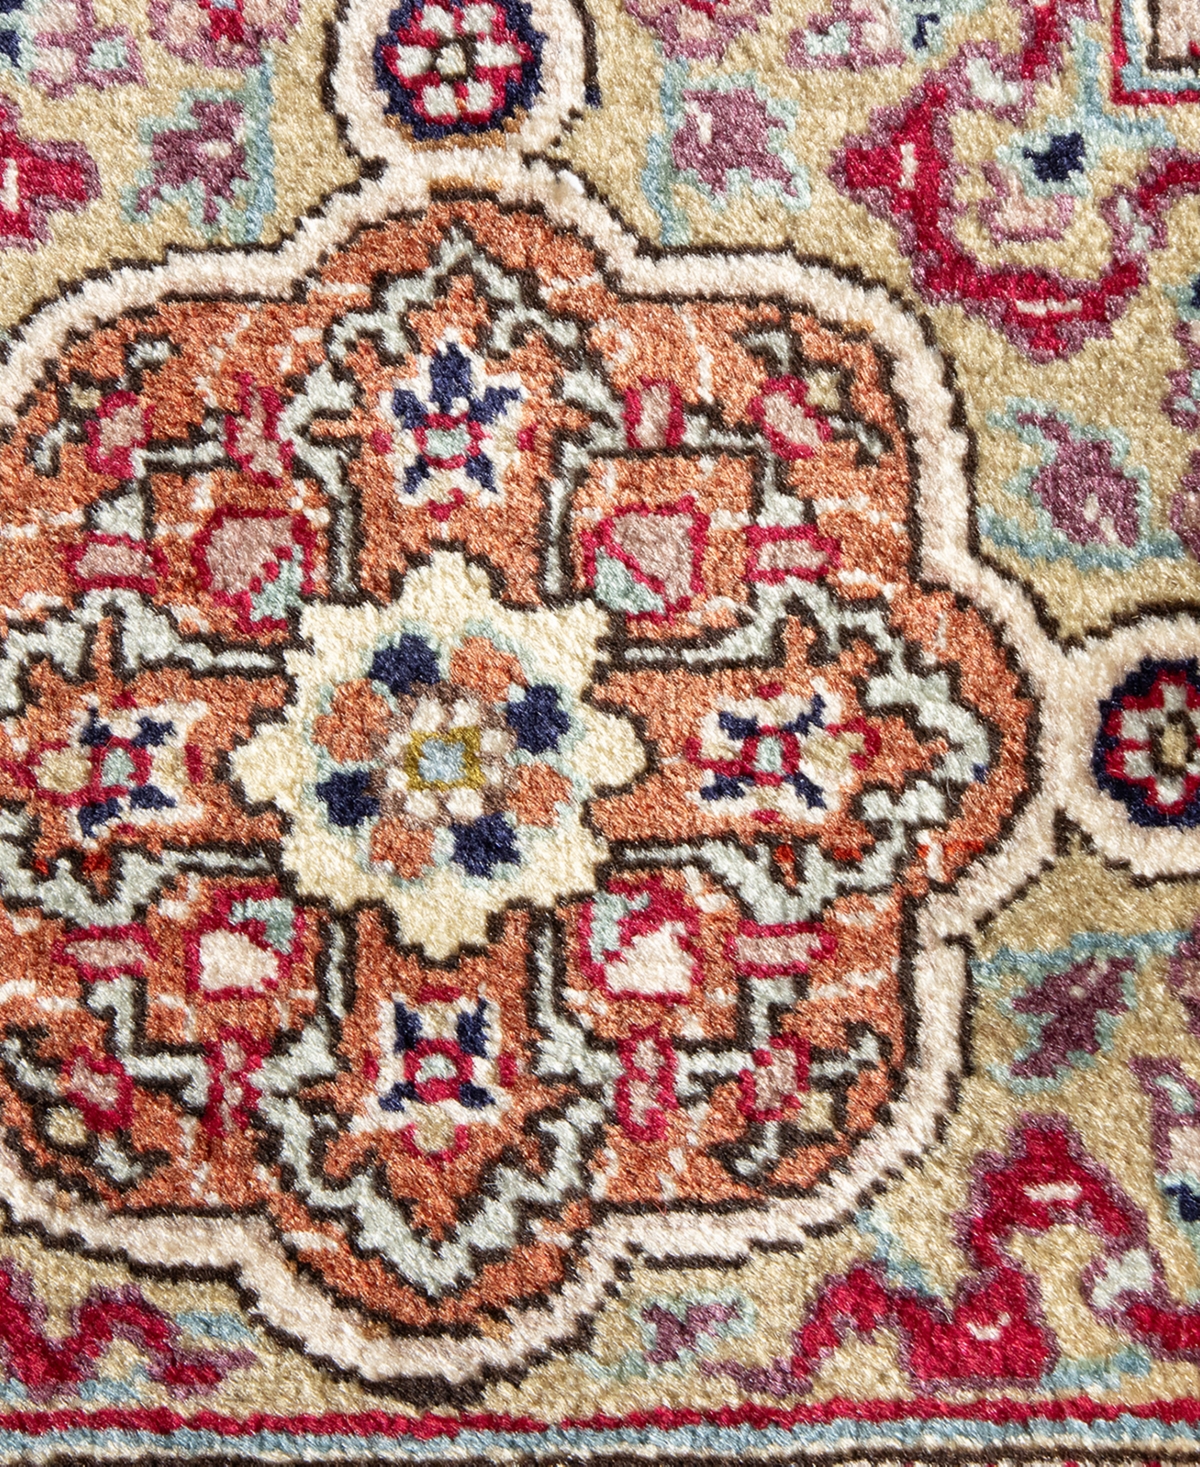 Shop Bb Rugs One Of A Kind Tabriz 9'9x13' Area Rug In Red